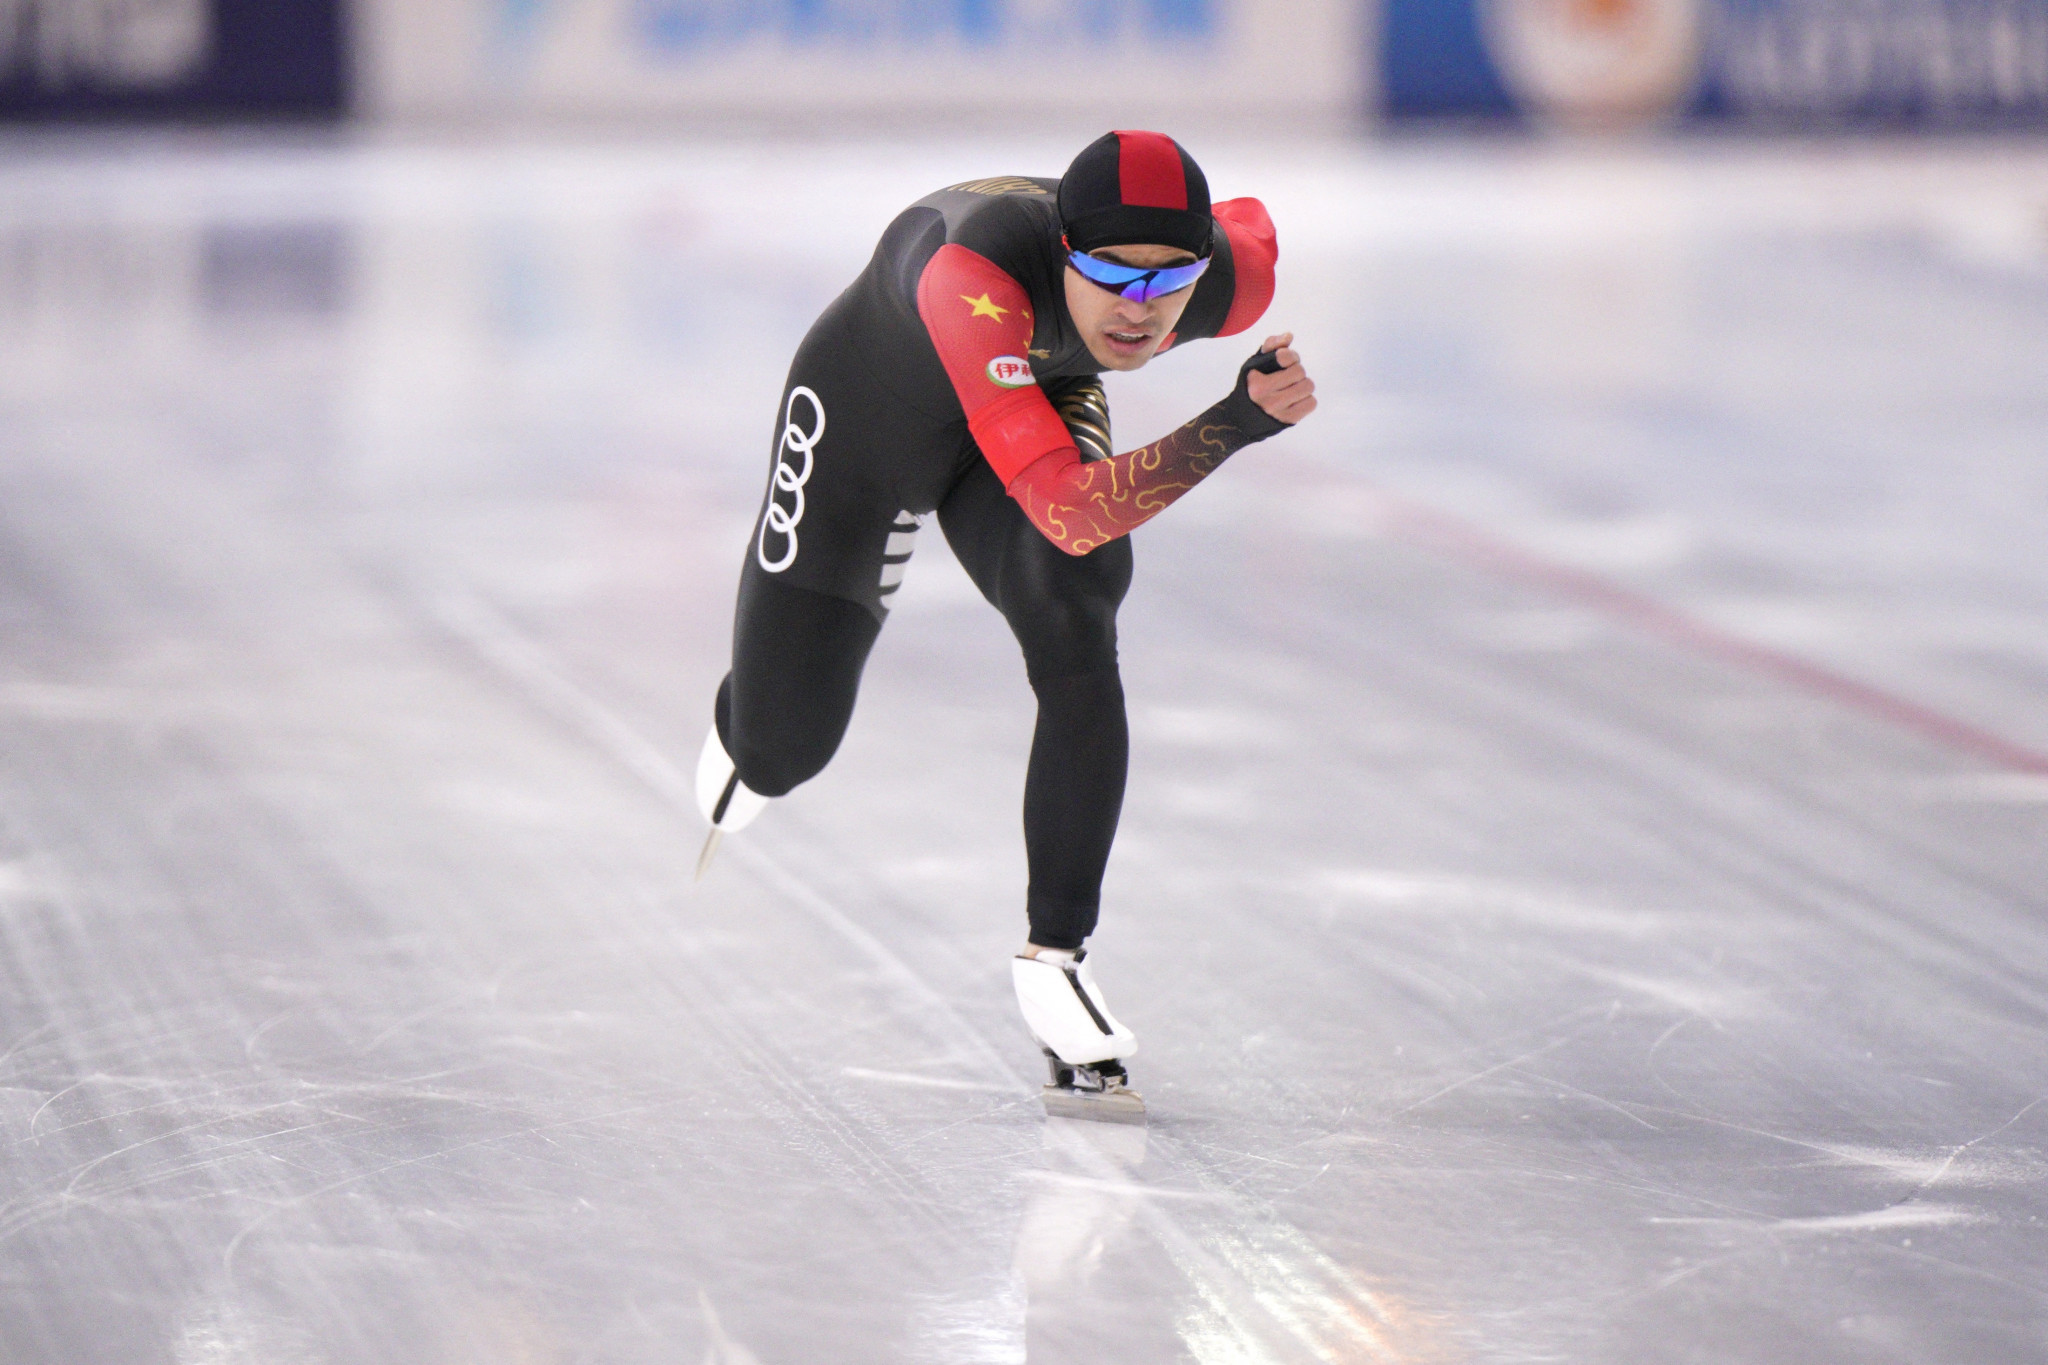 Zhongyan Ning won men's 1,000m gold at the Speed Skating World Cup event in Heerenveen last November but China has yet to take the winter sport world by storm ©Getty Images